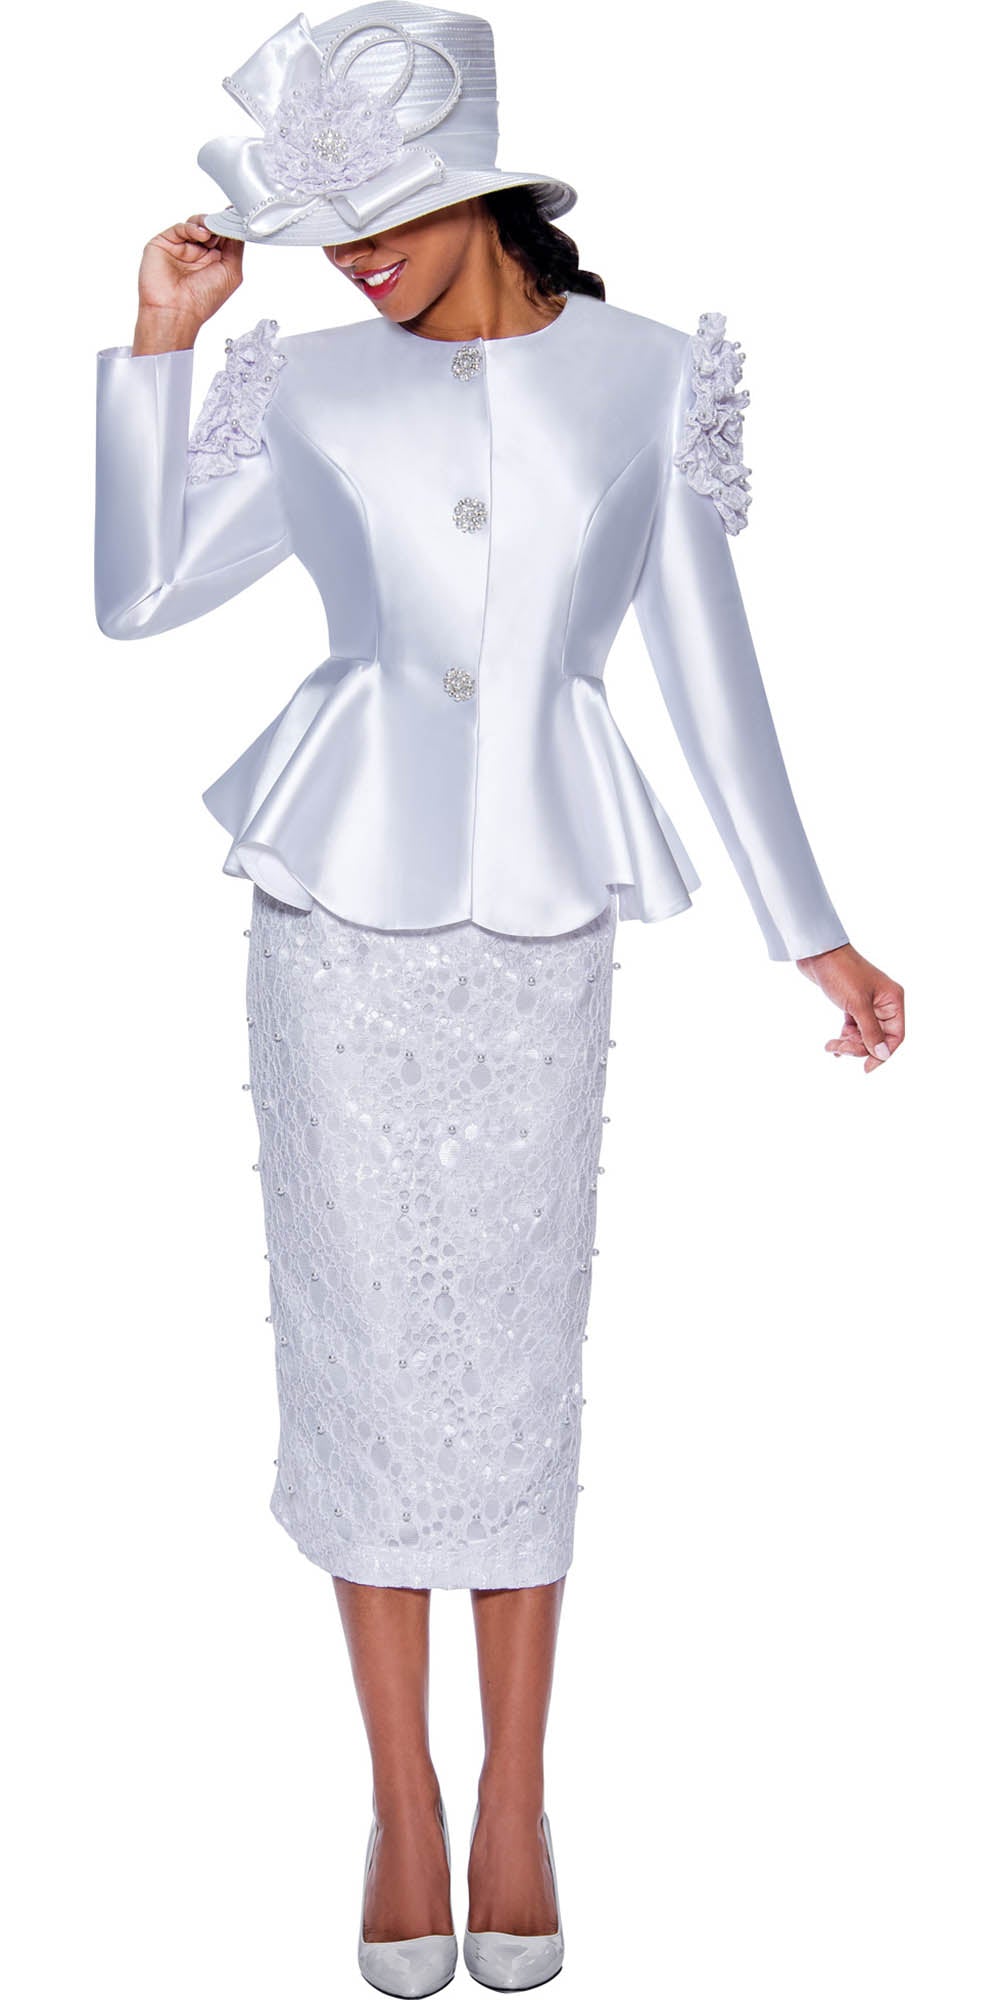 GMI G9172 - White 2PC Peplum Skirt Suit with Lace and Pearl Detailing